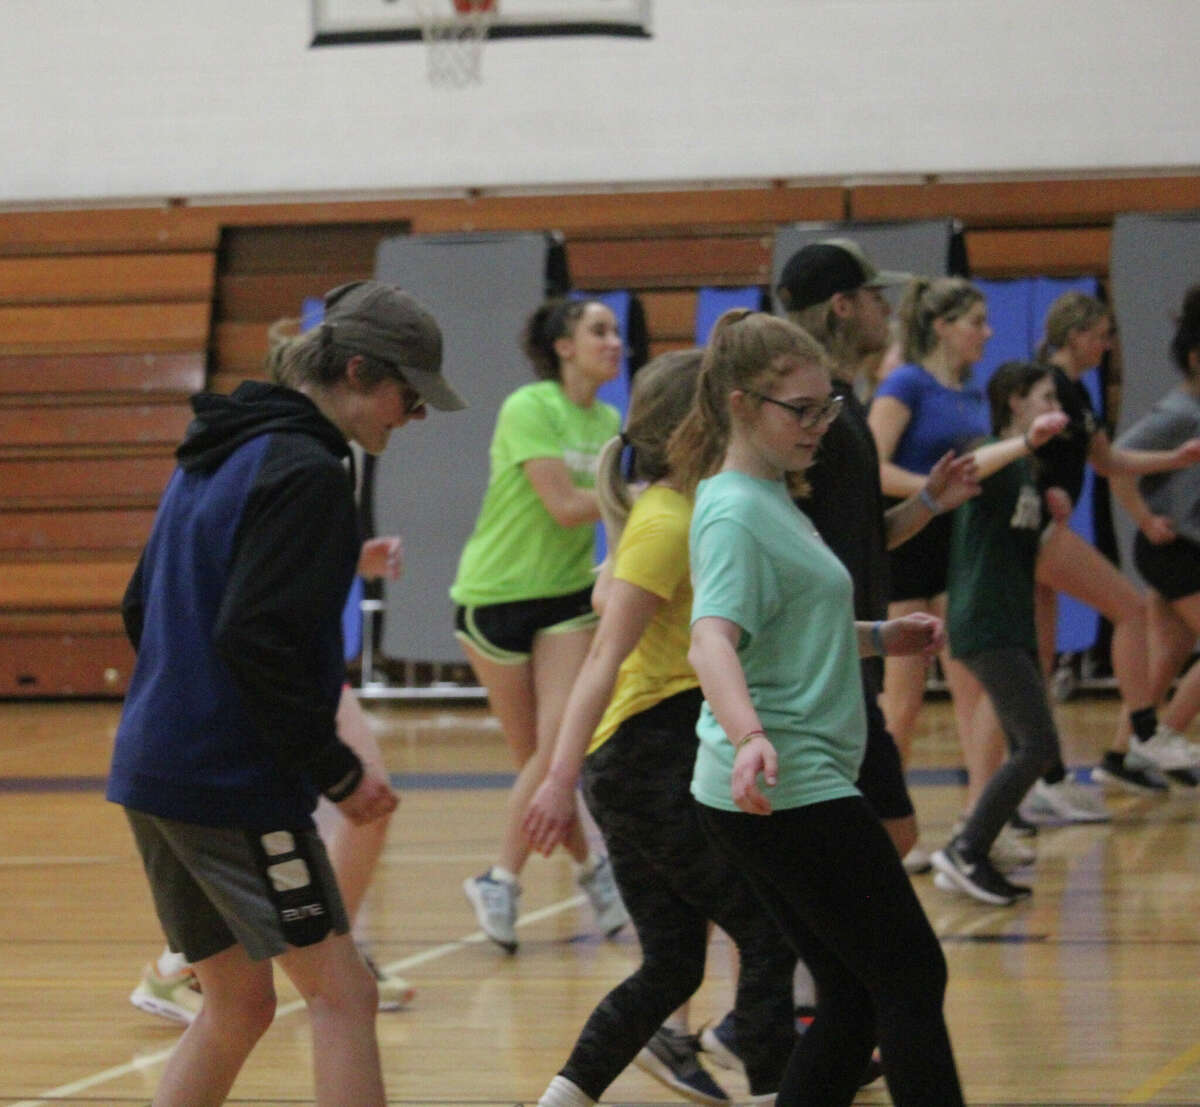 Morley Stanwood track and field athletes go through a workout in the elementary gymnasium.